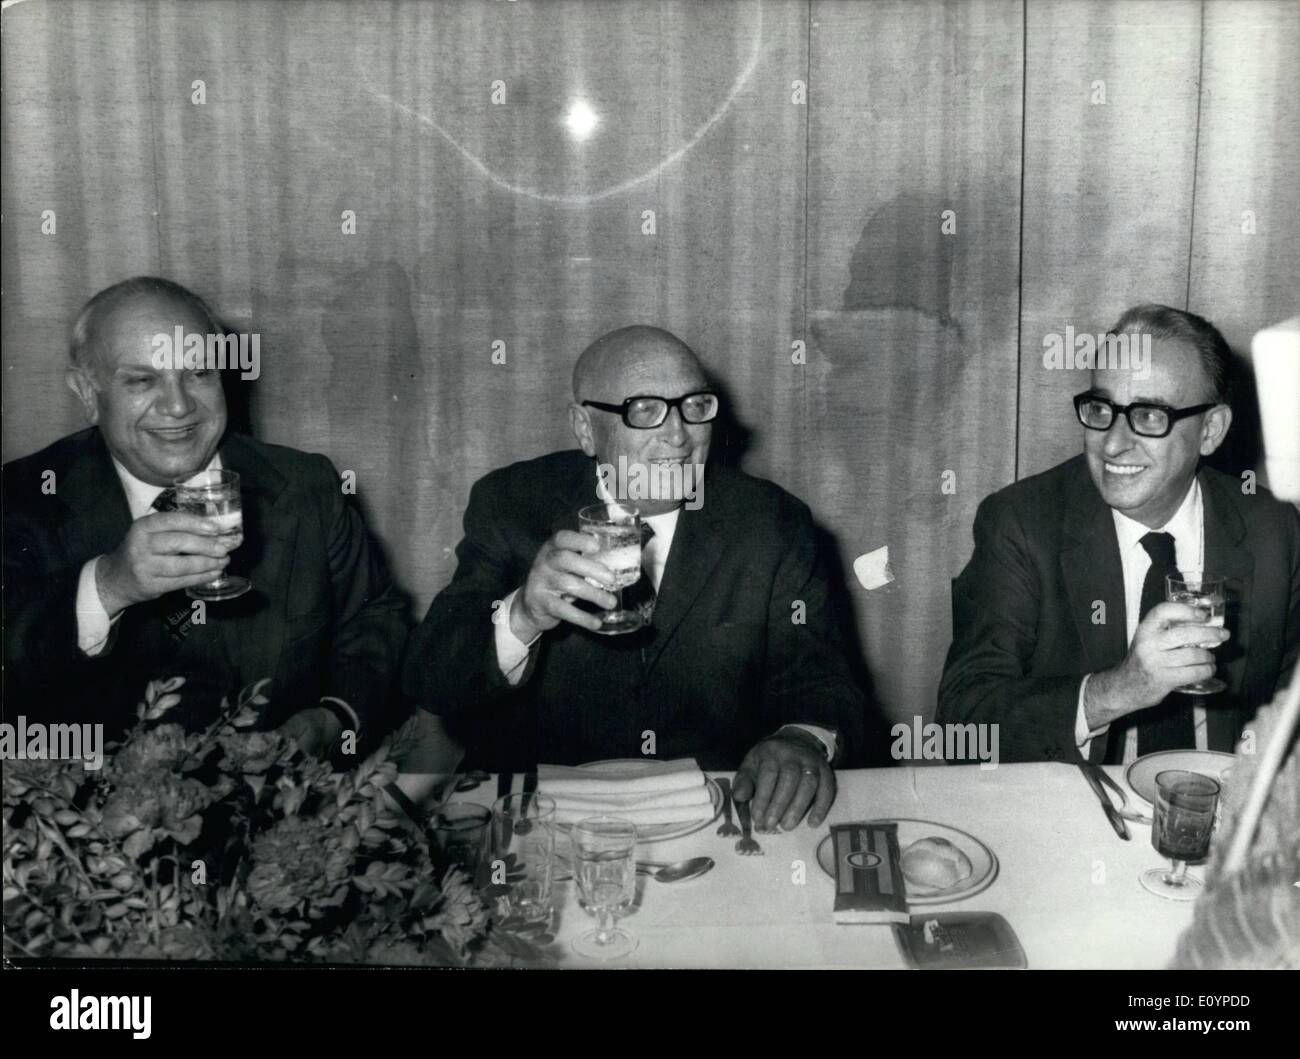 Feb. 02, 1971 - Pietro Nenni, the old leader of the Italian Socialism, was eighty years and the Direction of the PSI (Italian Socialist Party) celebrated him. Photo shows Pietro Nenni, (center) feasted by the Vice Prime Minister Francesco De Martino (left) and by Giacomo Mancini, secretary of the Party. Stock Photo